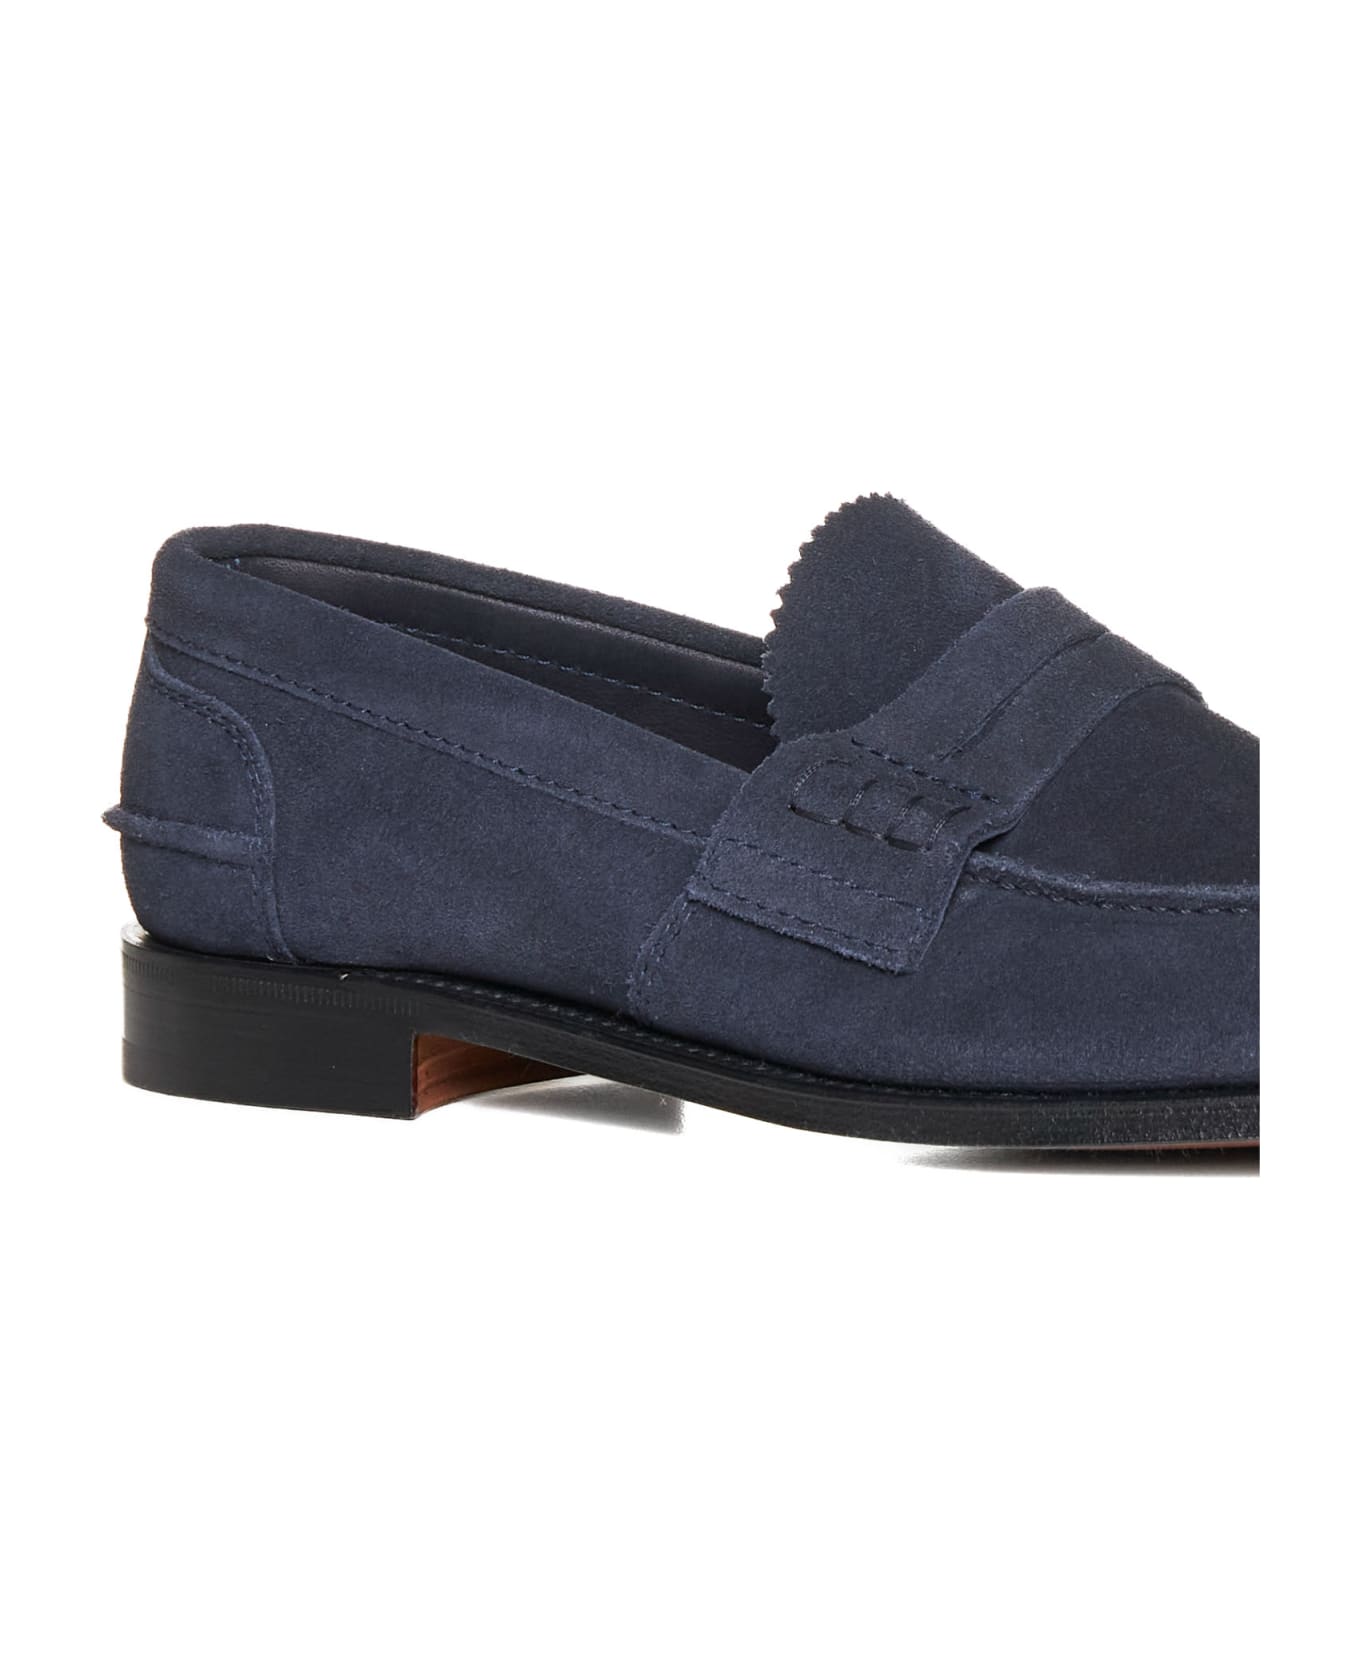 Church's Loafers - Navy blue